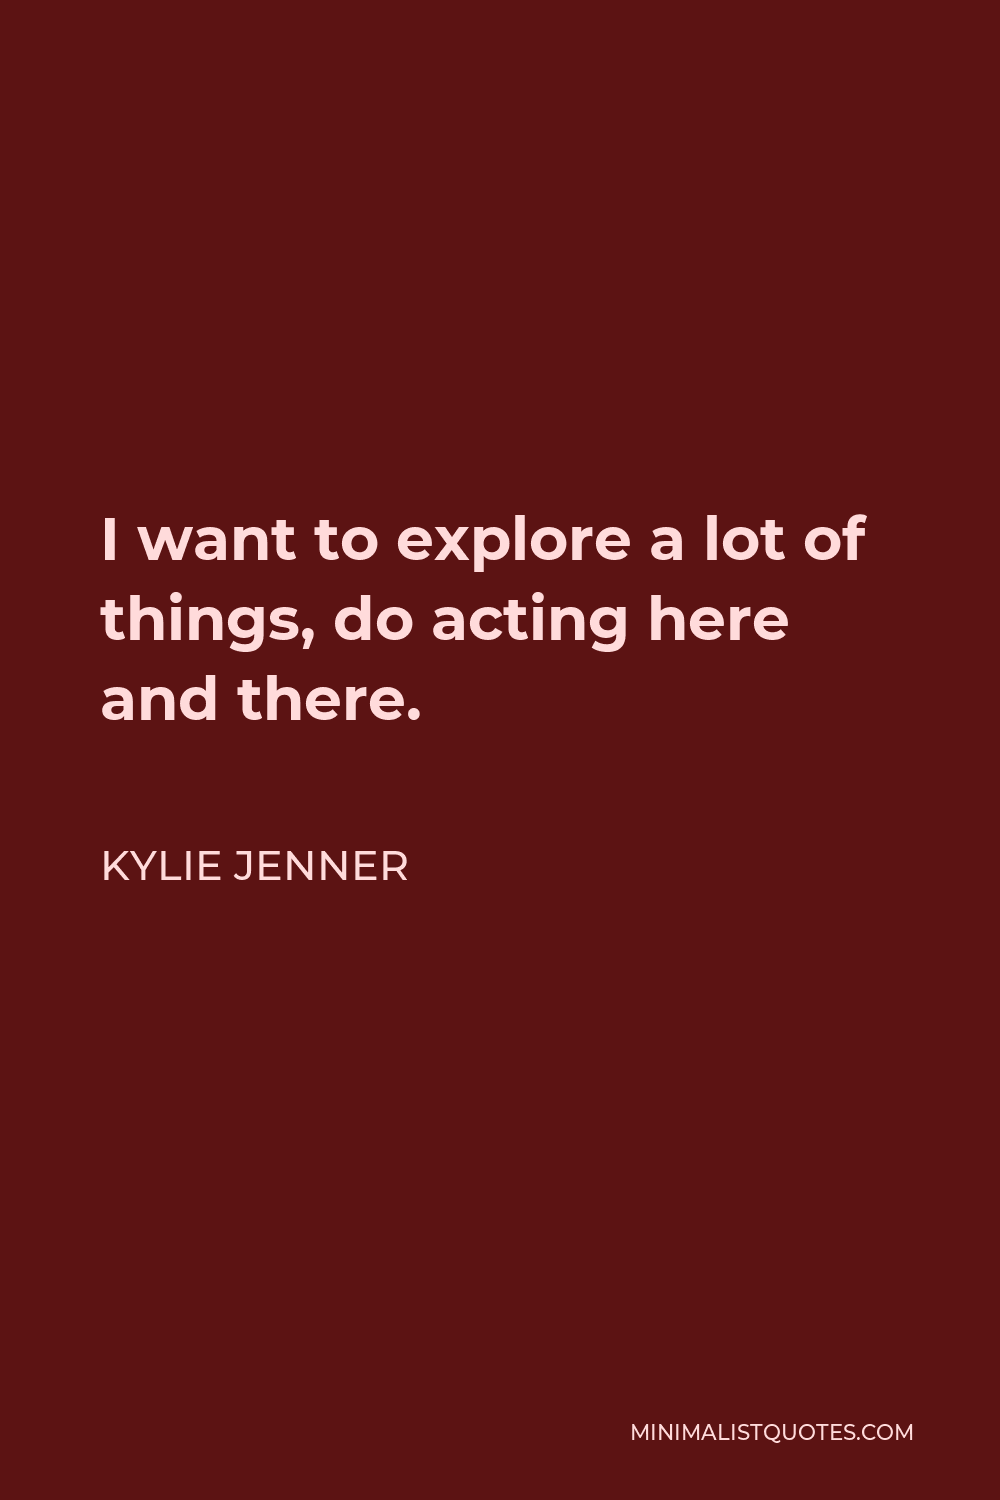 Kylie Jenner Quote - I want to explore a lot of things, do acting here and there.